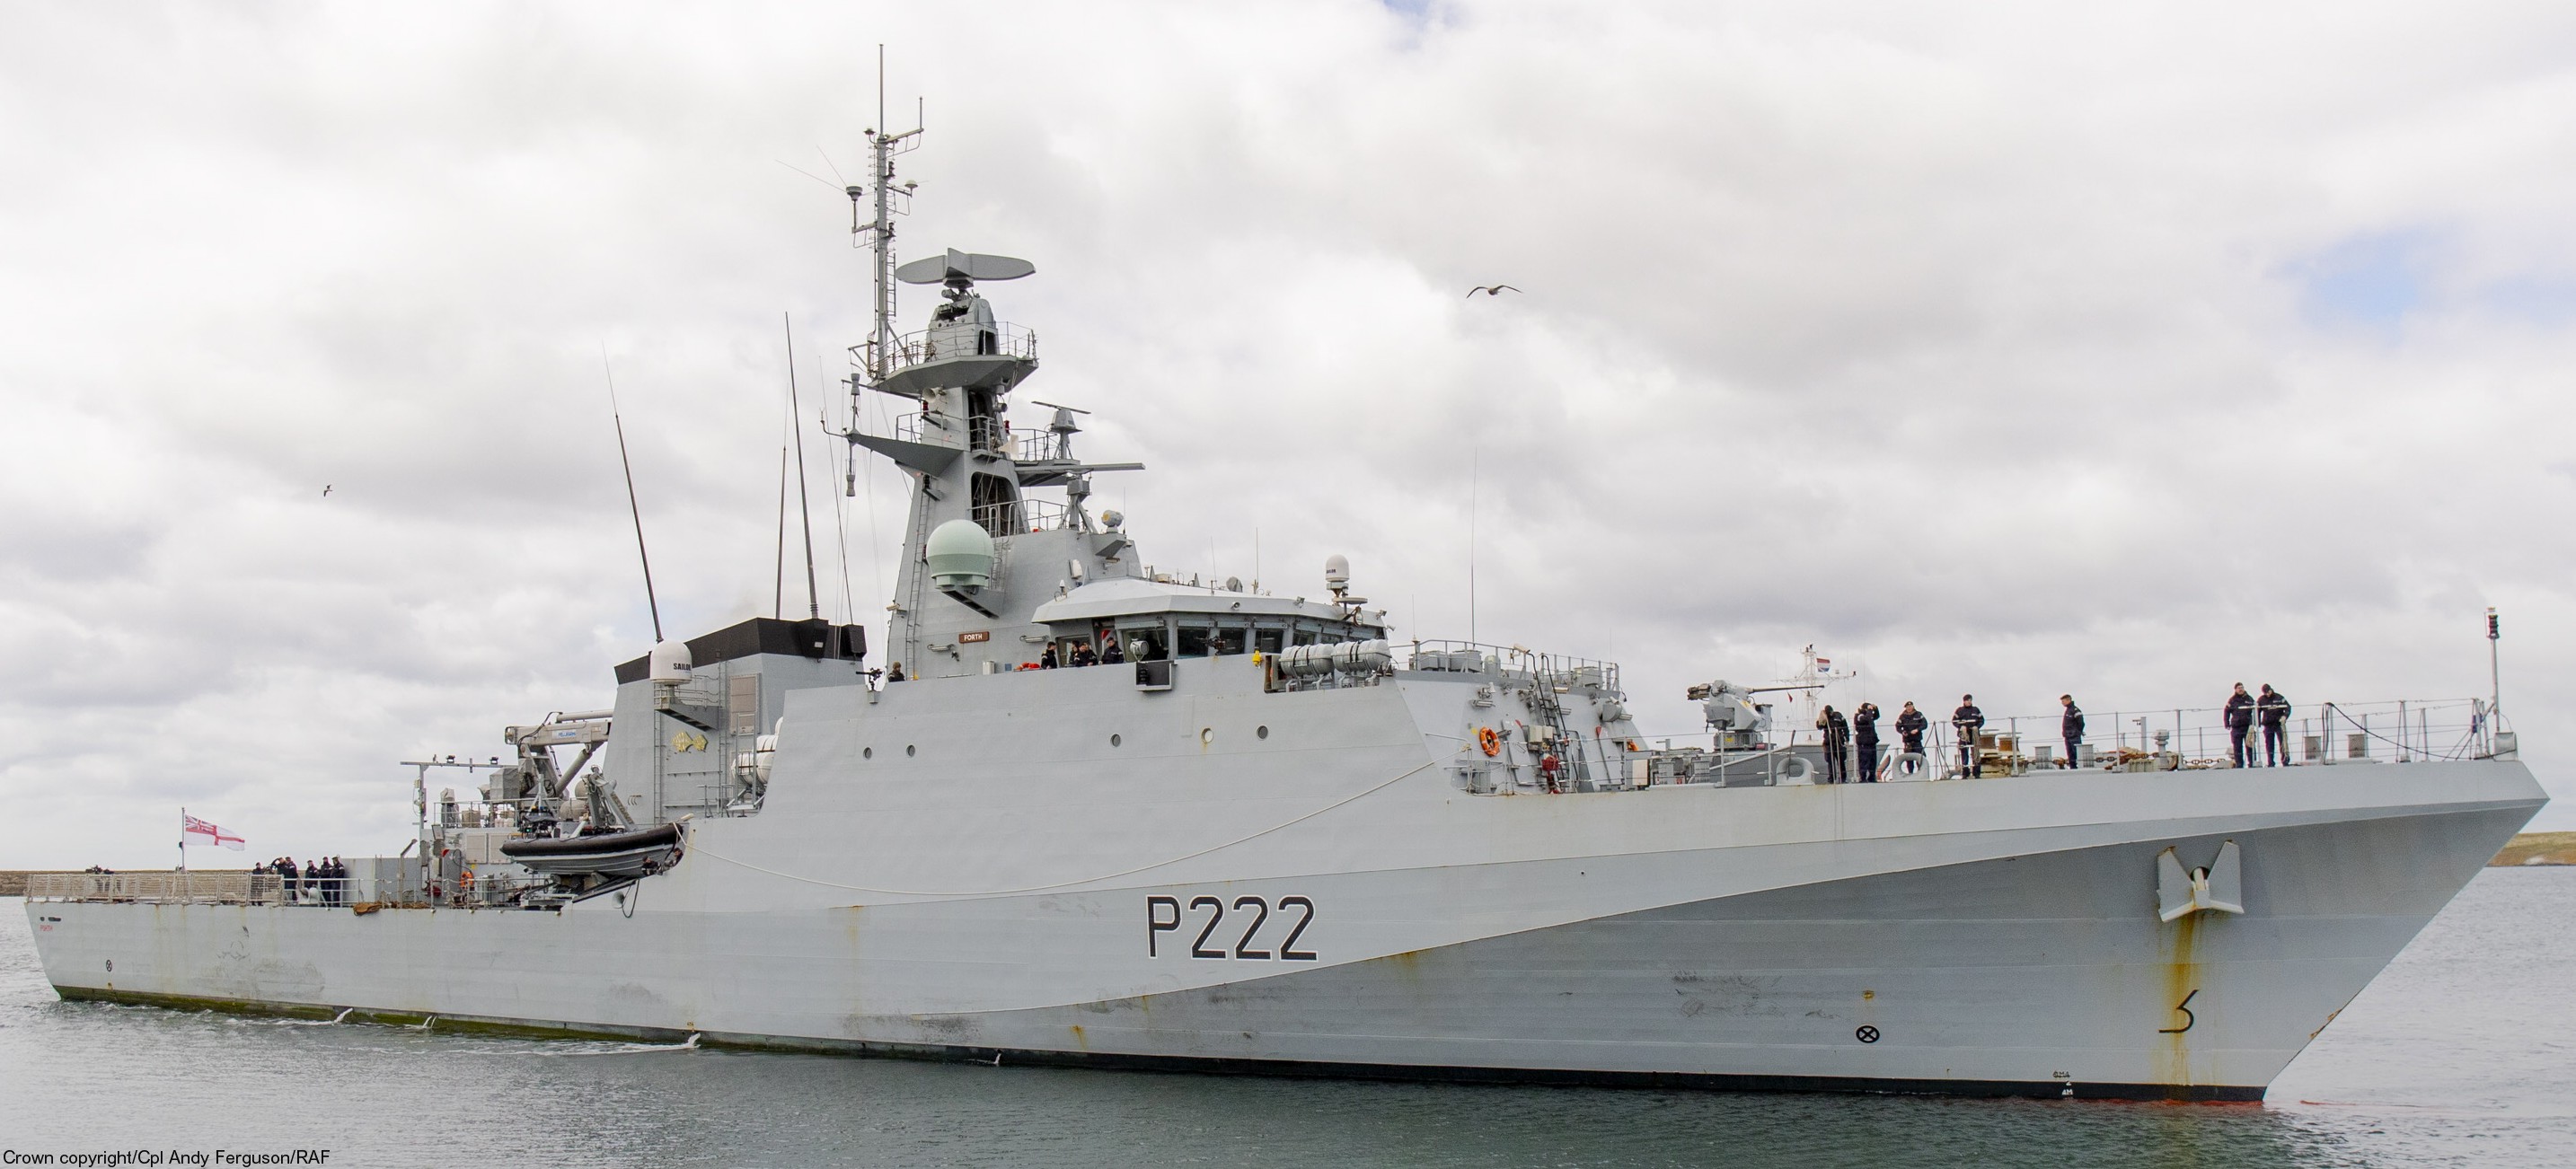 p-222 hms forth river class offshore patrol vessel opv royal navy 08